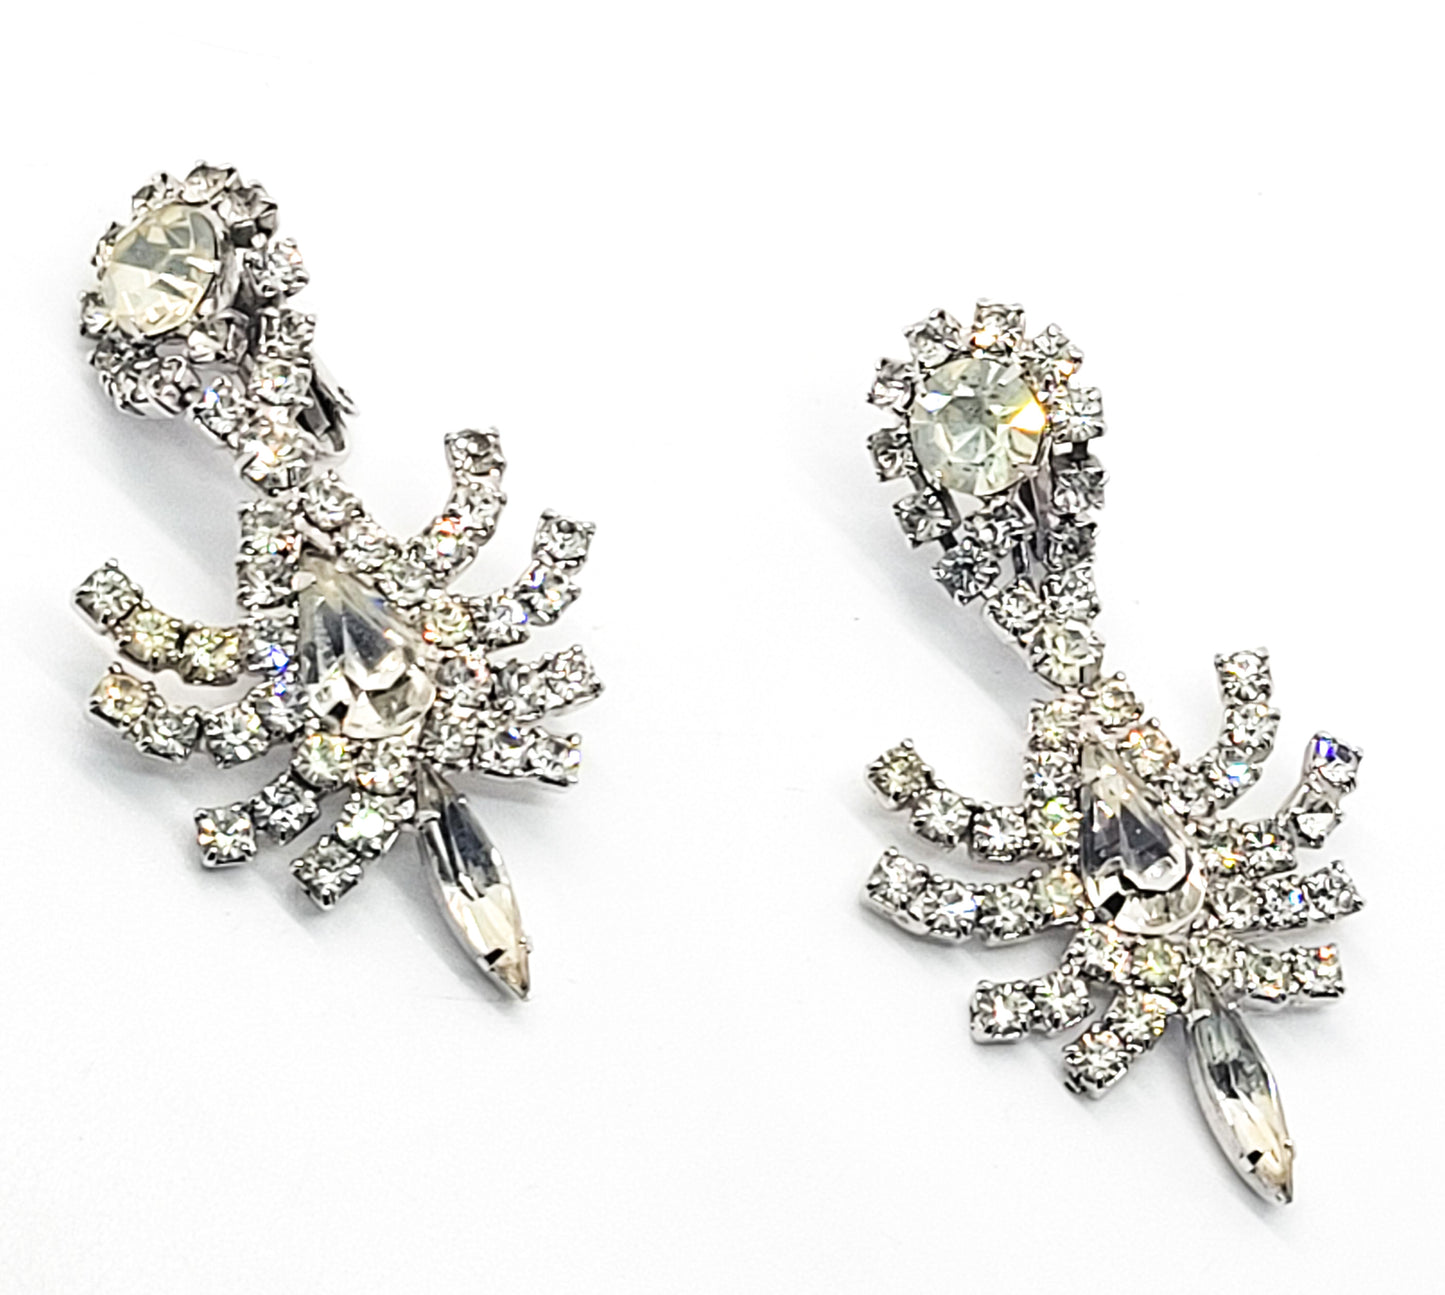 Clear rhinestone Spider retro vintage large drop clip on earrings